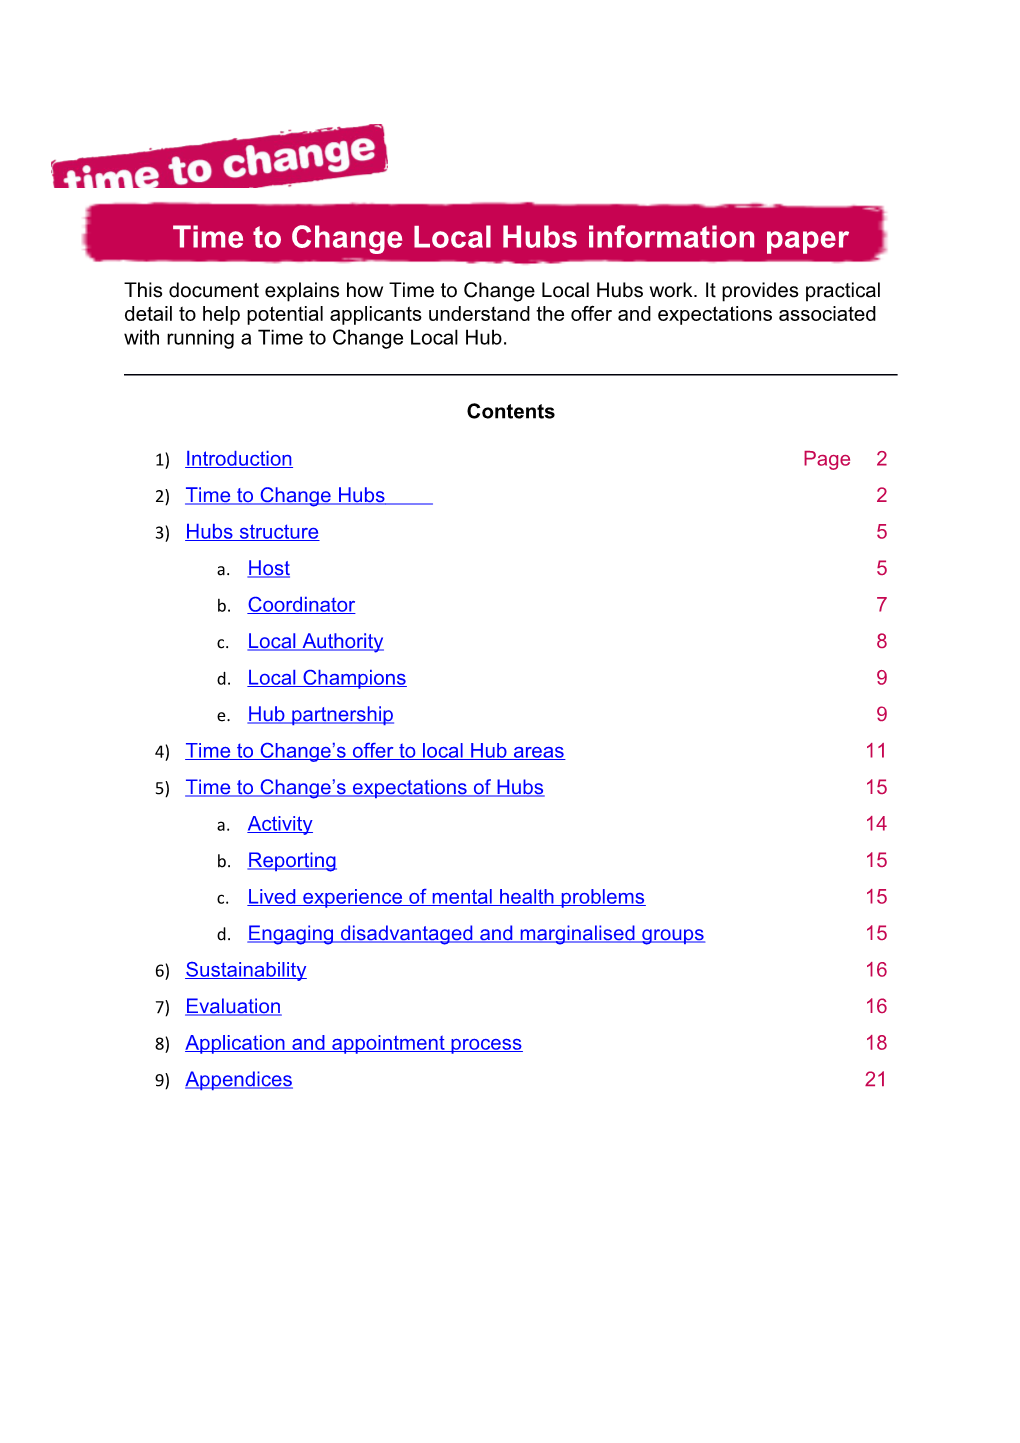 Time to Change Local Hubs Information Paper